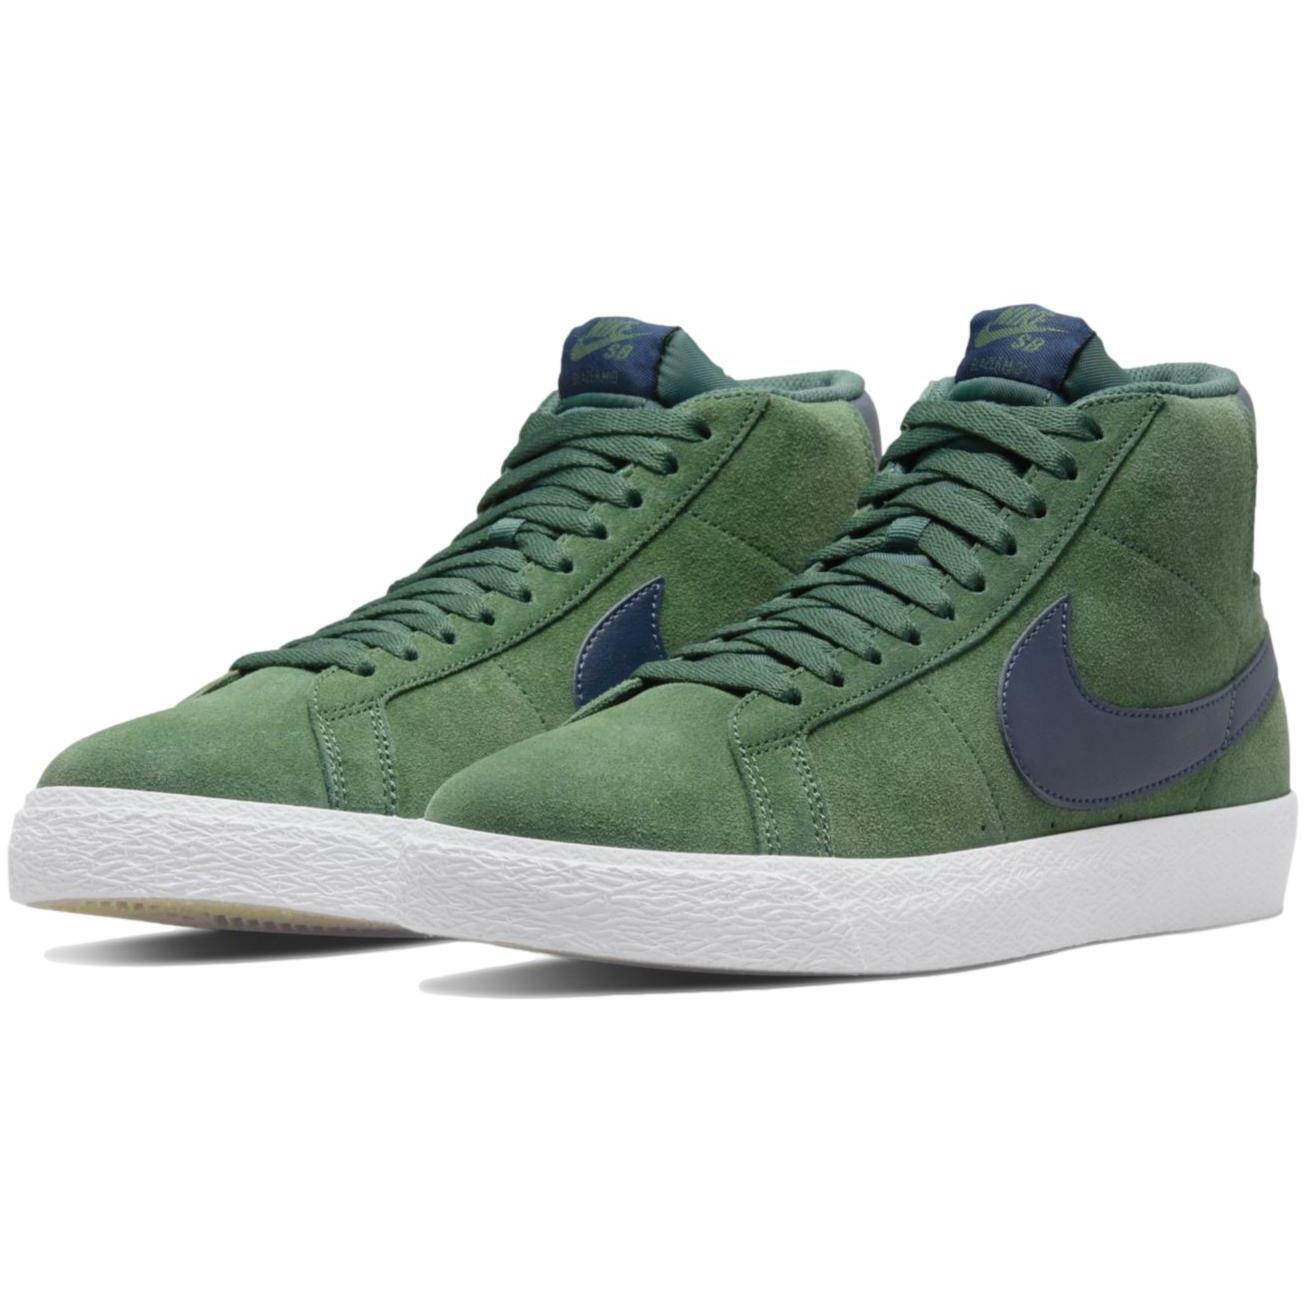 Nike Men`s Zoom Blazer Mid SB `noble Green` Shoes Sneakers 864349-302 - Noble Green/Midnight Navy